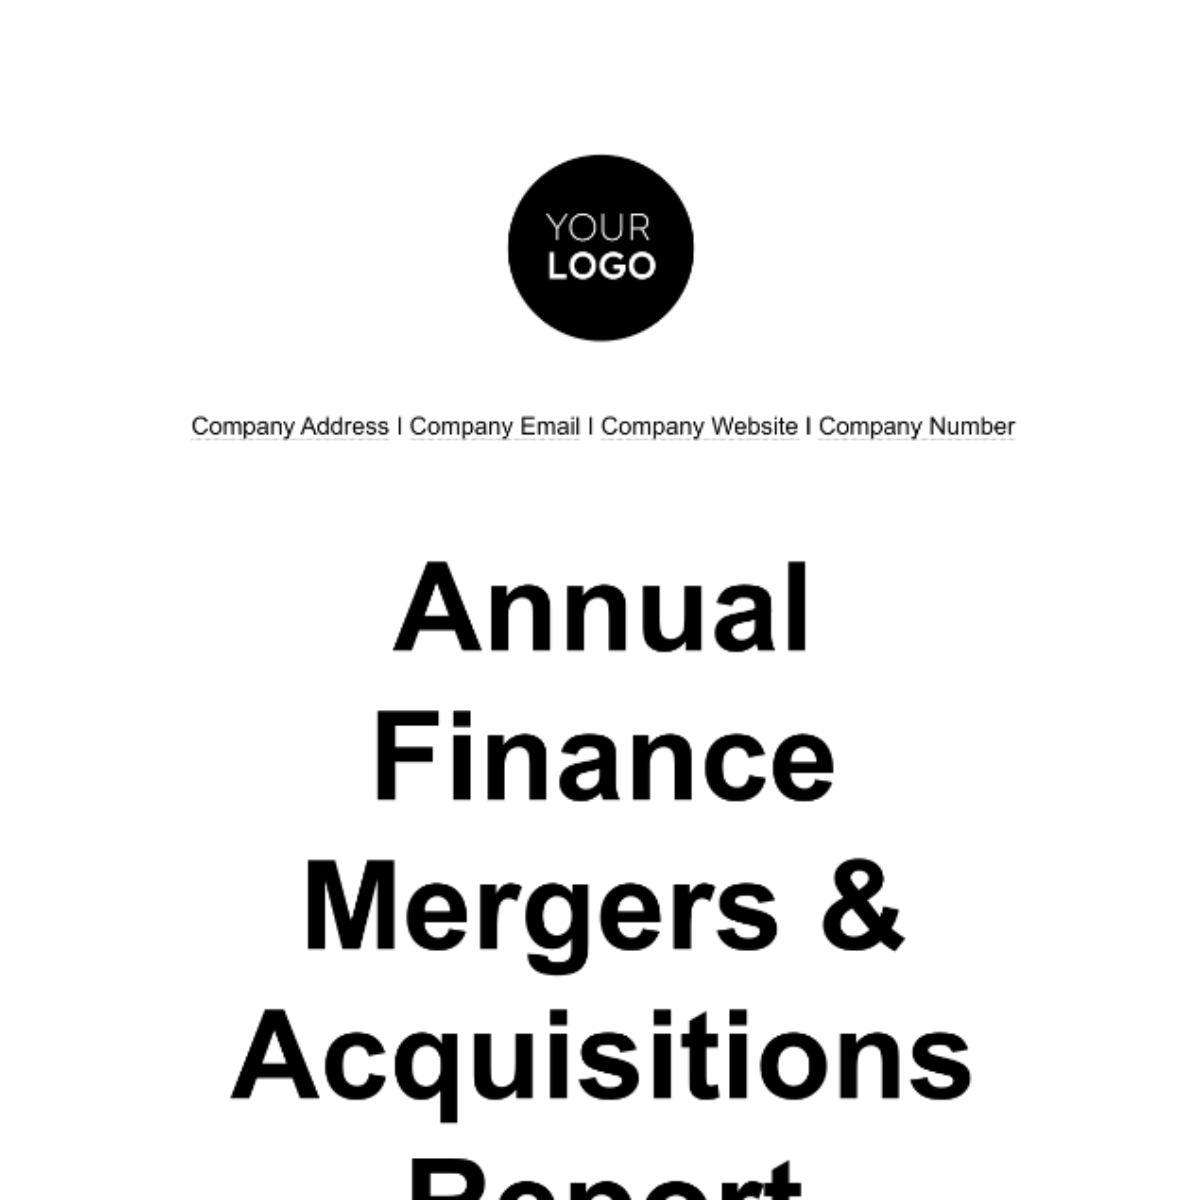 Free Annual Finance Mergers & Acquisitions Report Template